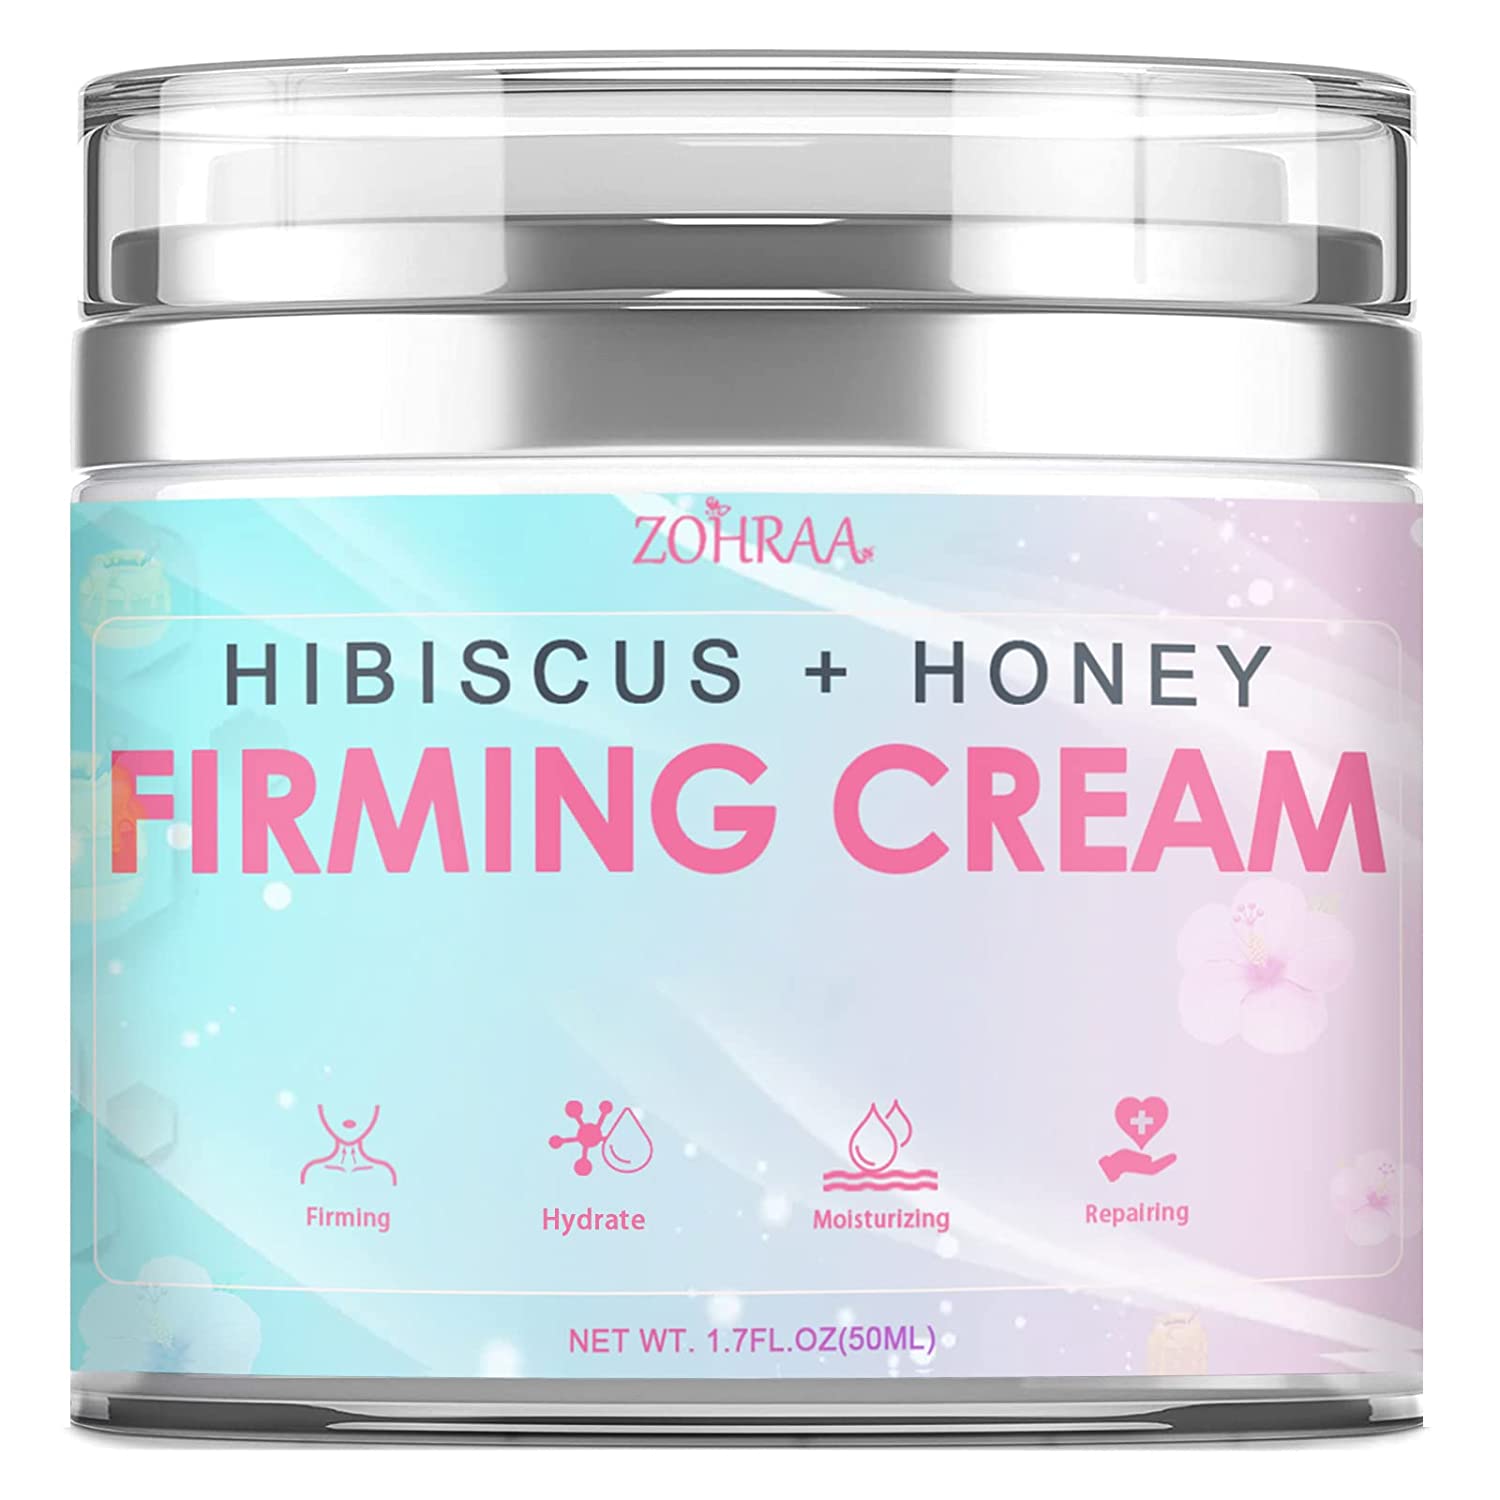  Inner Thigh Firming Cream, Hibiscus And Honey Firming Cream, Cellulite  Cream For Thighs, Skin Tightening Cream, Firms, Smoothes & Nourishes, For  Women And Men, 4.23 Oz